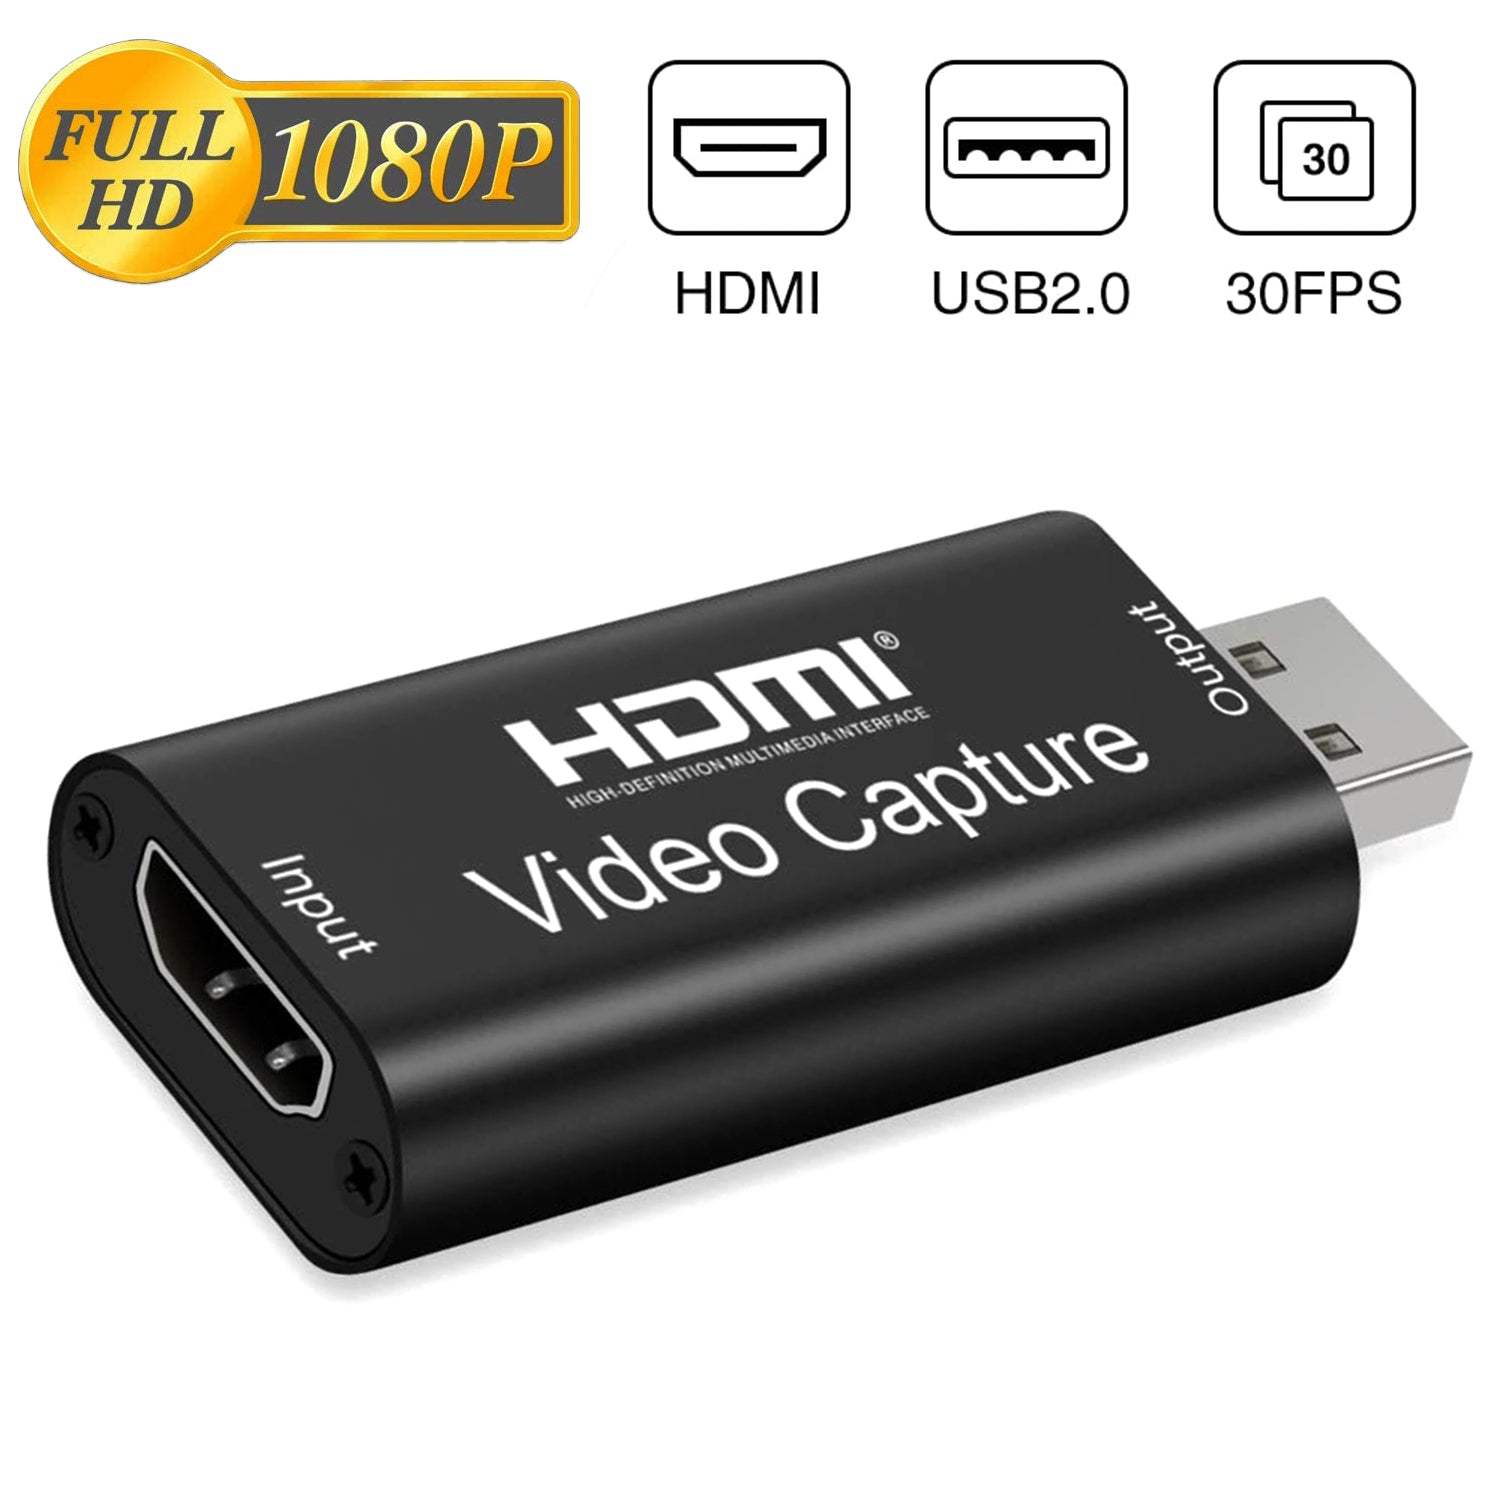 HDMI to USB2.0 Video Capture Card 1080P Recorder Phone Game/Video